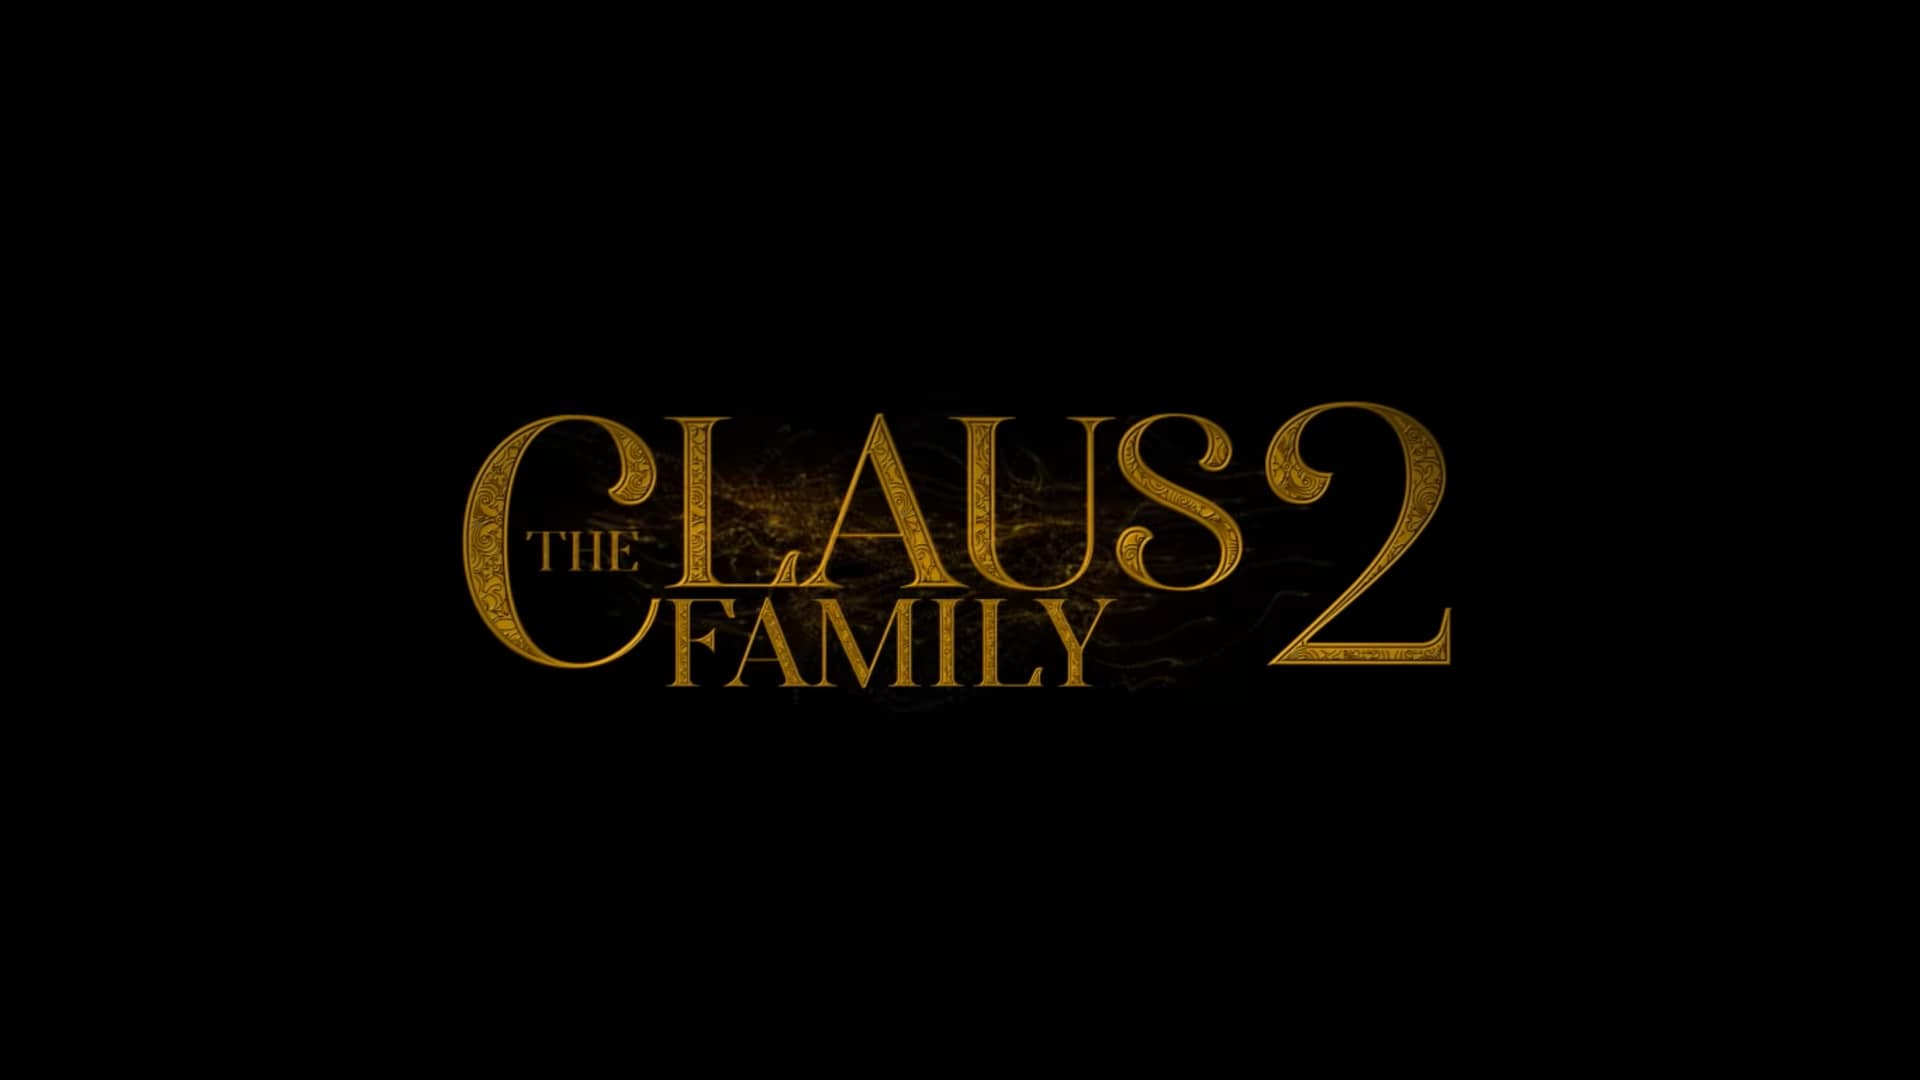 Netflix The Claus Family 2 Trailer, Coming to Netflix in December 2021